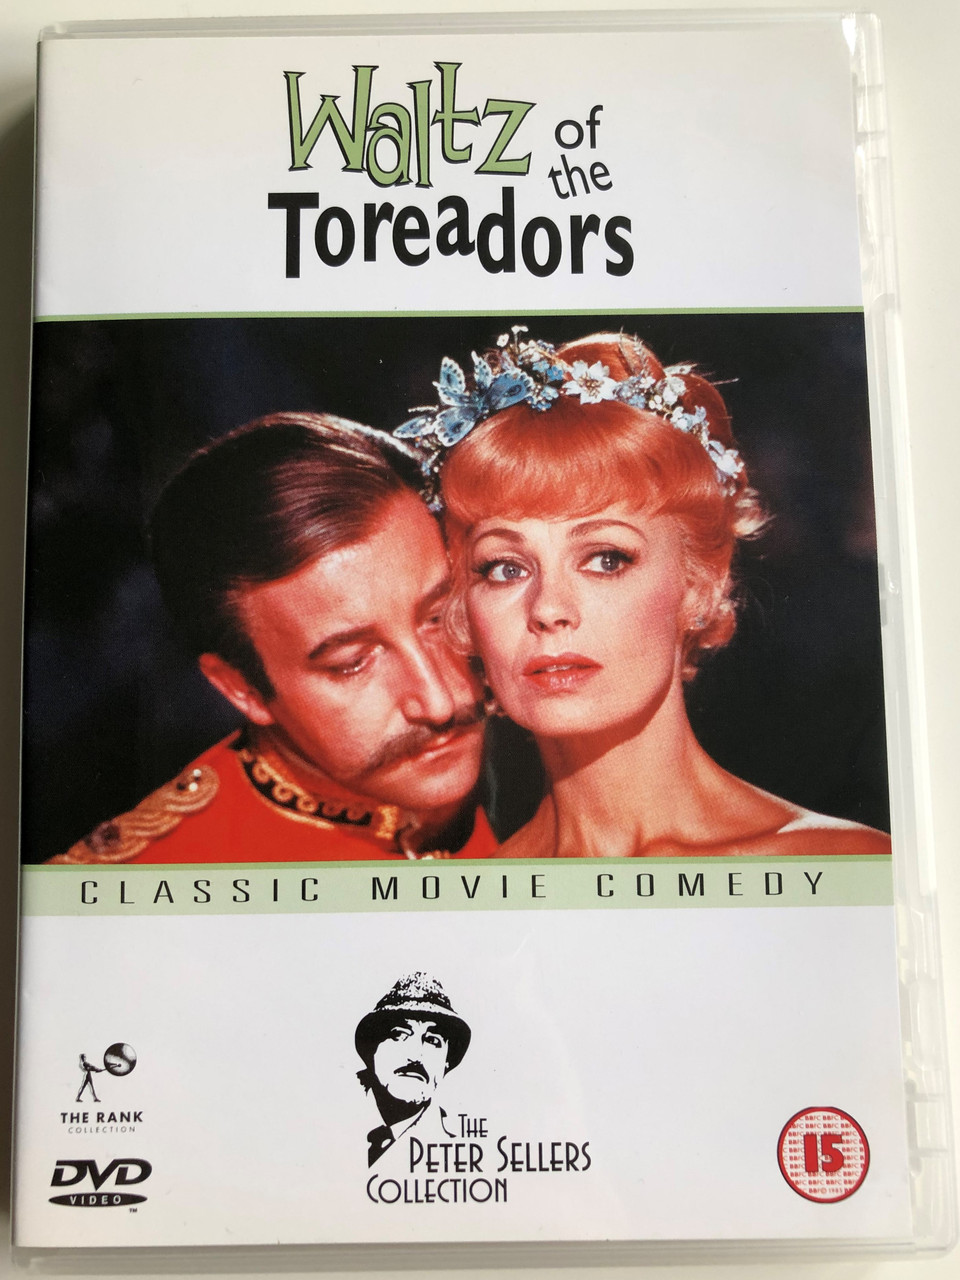 Waltz of the Toreadors DVD 1962 Classic Movie comedy - The Peter Sellers  Collection / Directed by John Guillermin / Starring: Peter Sellers, Dany  Robin, John Fraser, Cyril Cusack - bibleinmylanguage